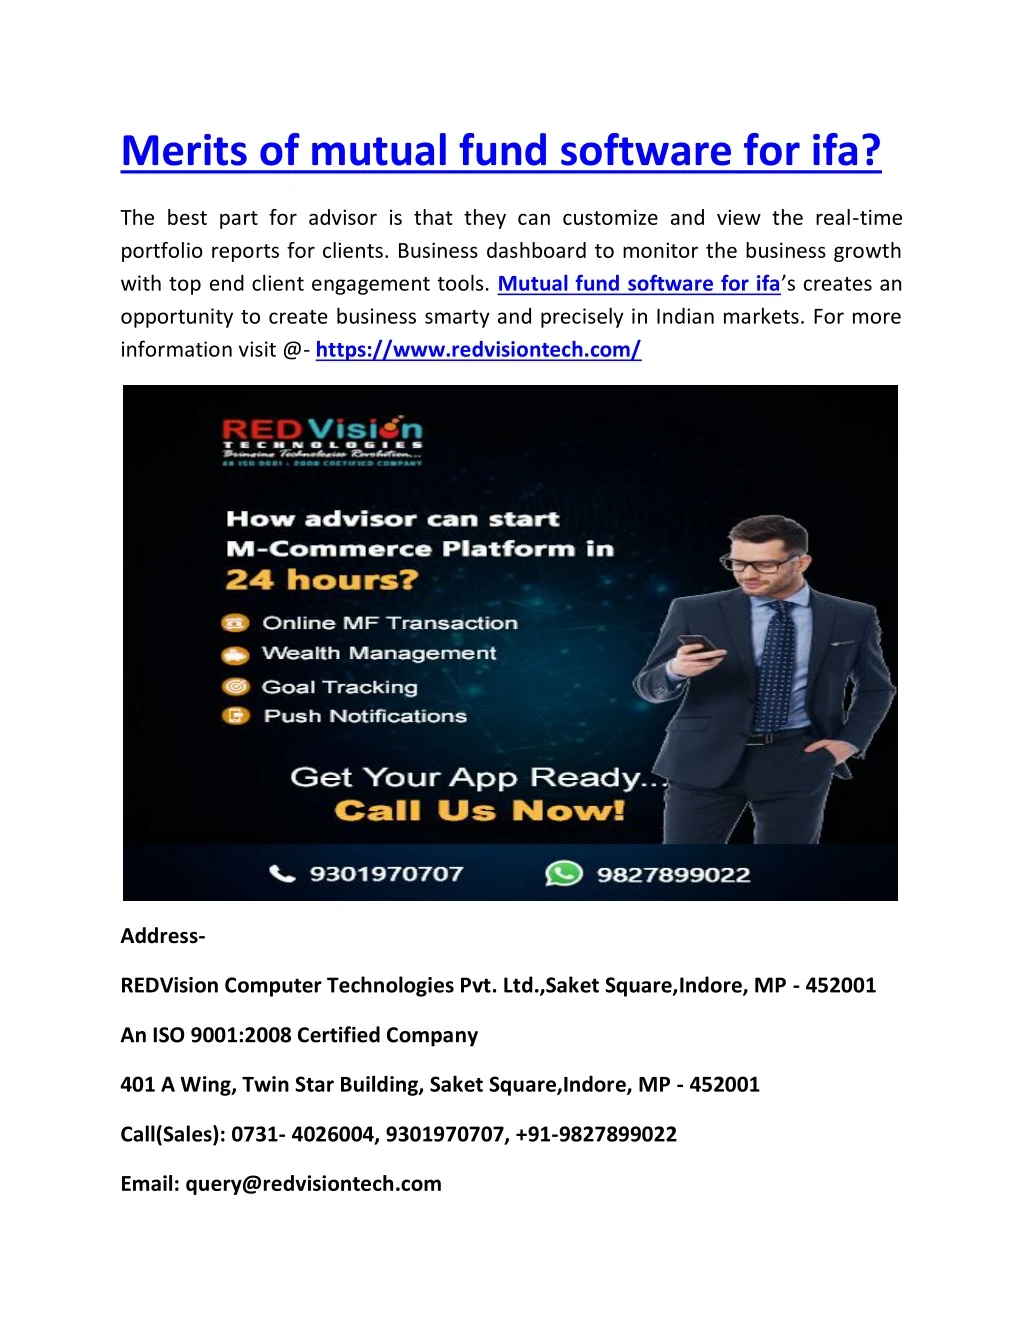 merits of mutual fund software for ifa